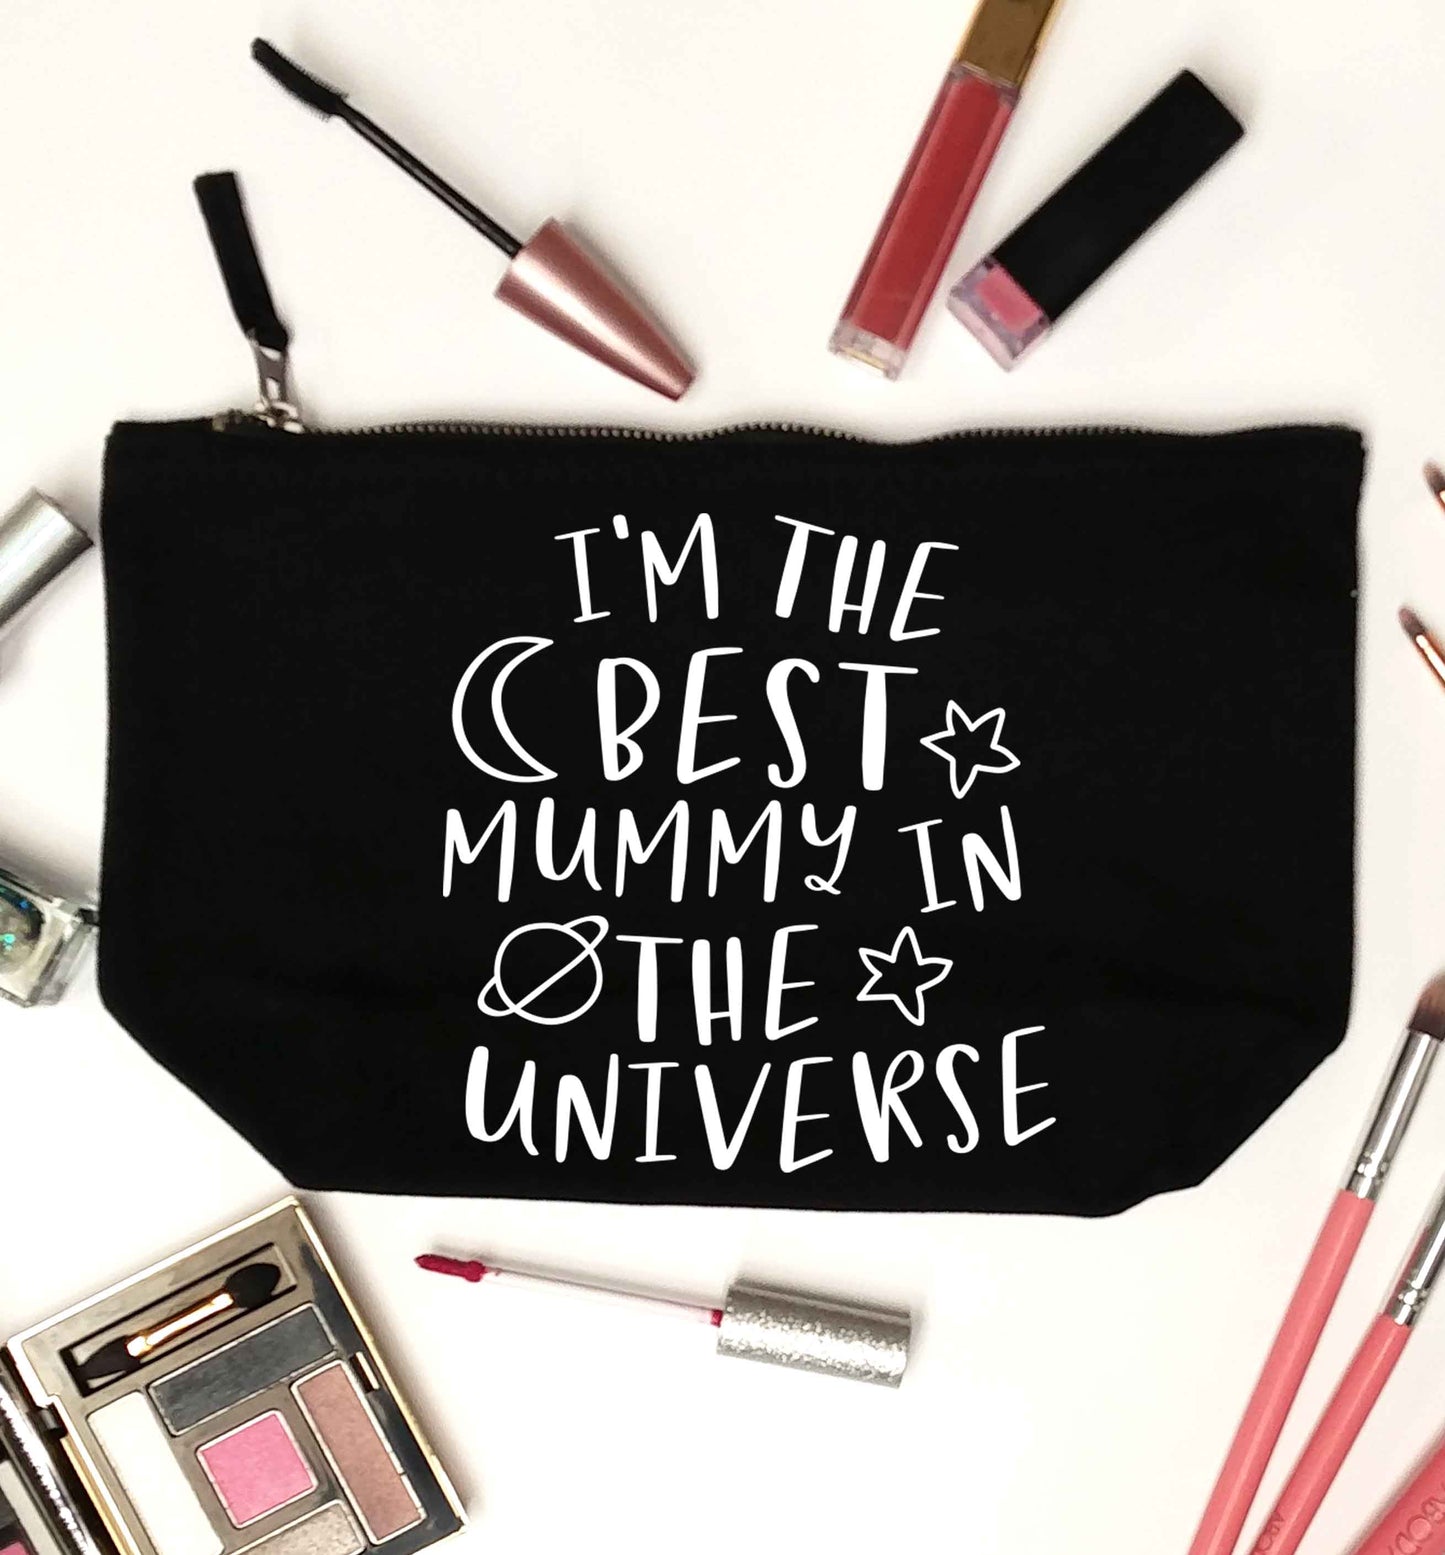 I'm the best mummy in the universe black makeup bag